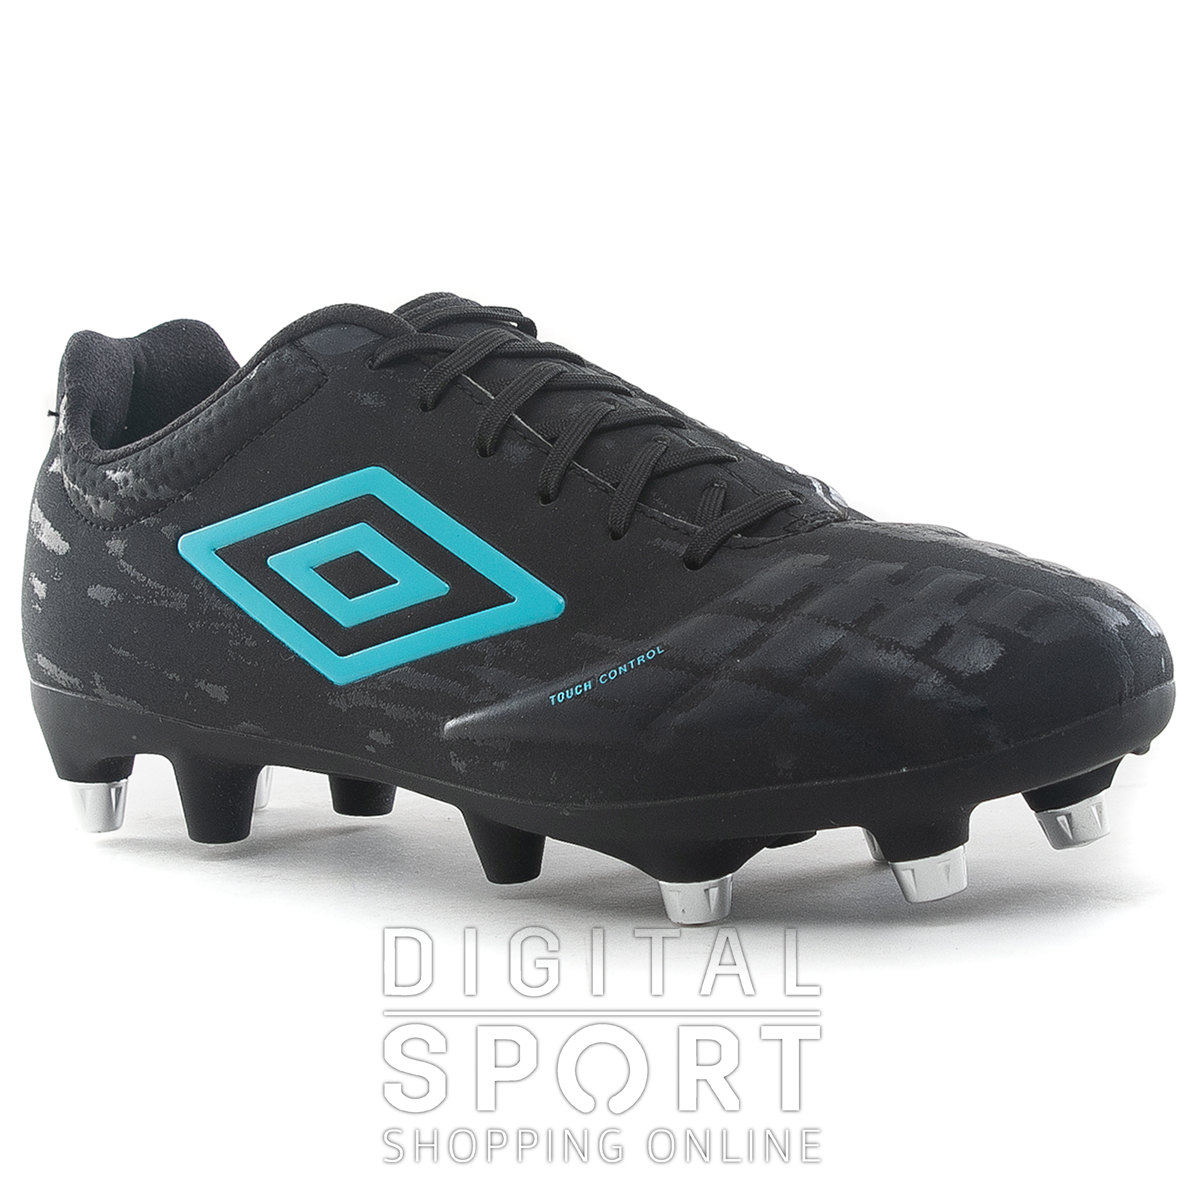 Adidas Botines Rugby Tapones Intercambiables Shop, 65% OFF | www.feg.ro